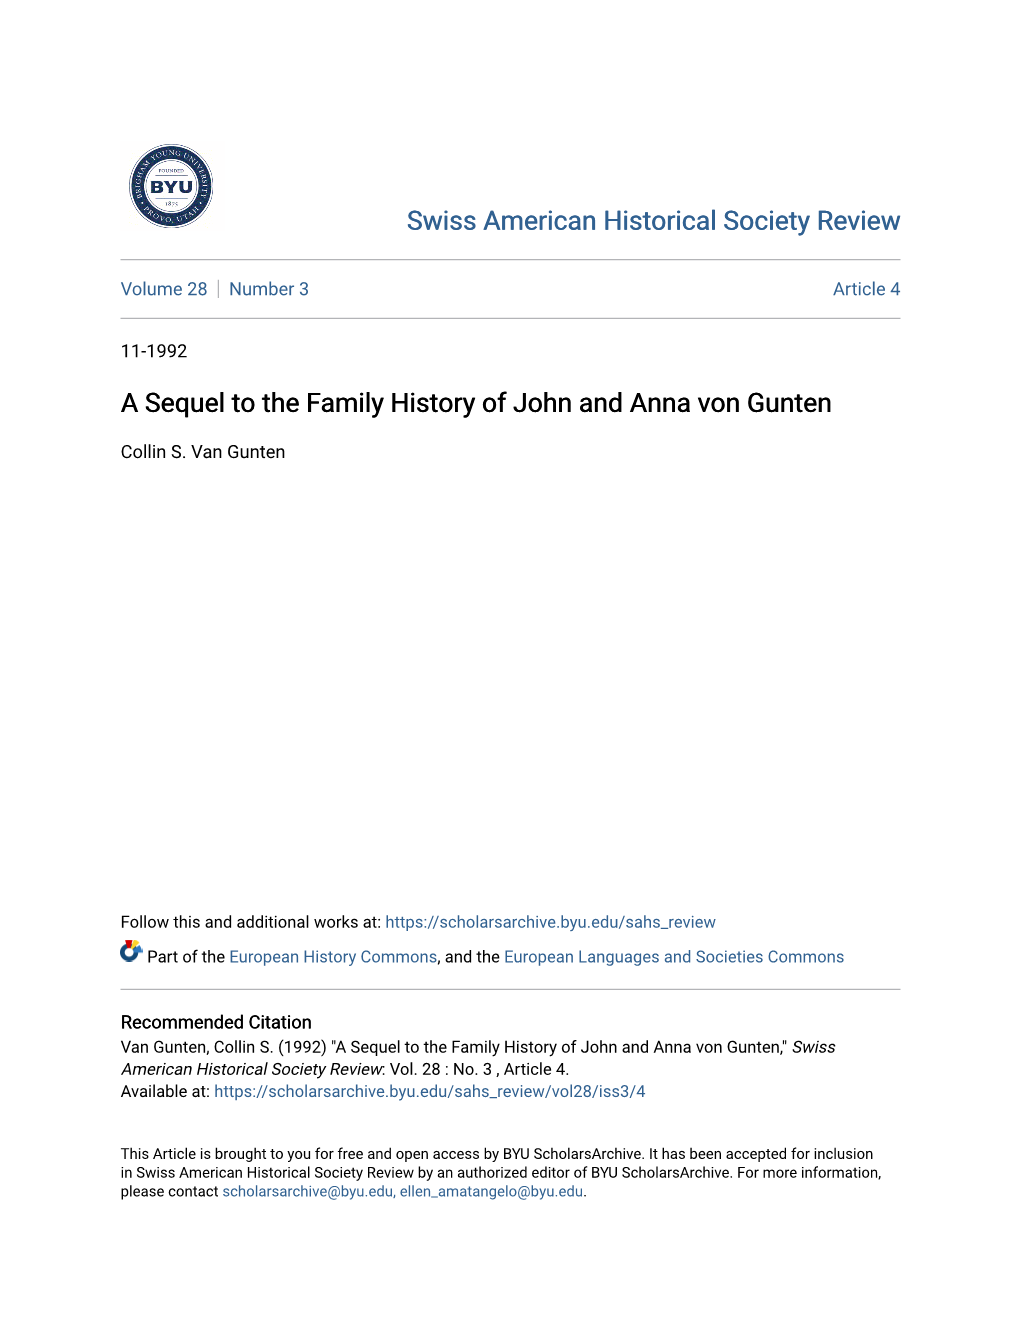 A Sequel to the Family History of John and Anna Von Gunten